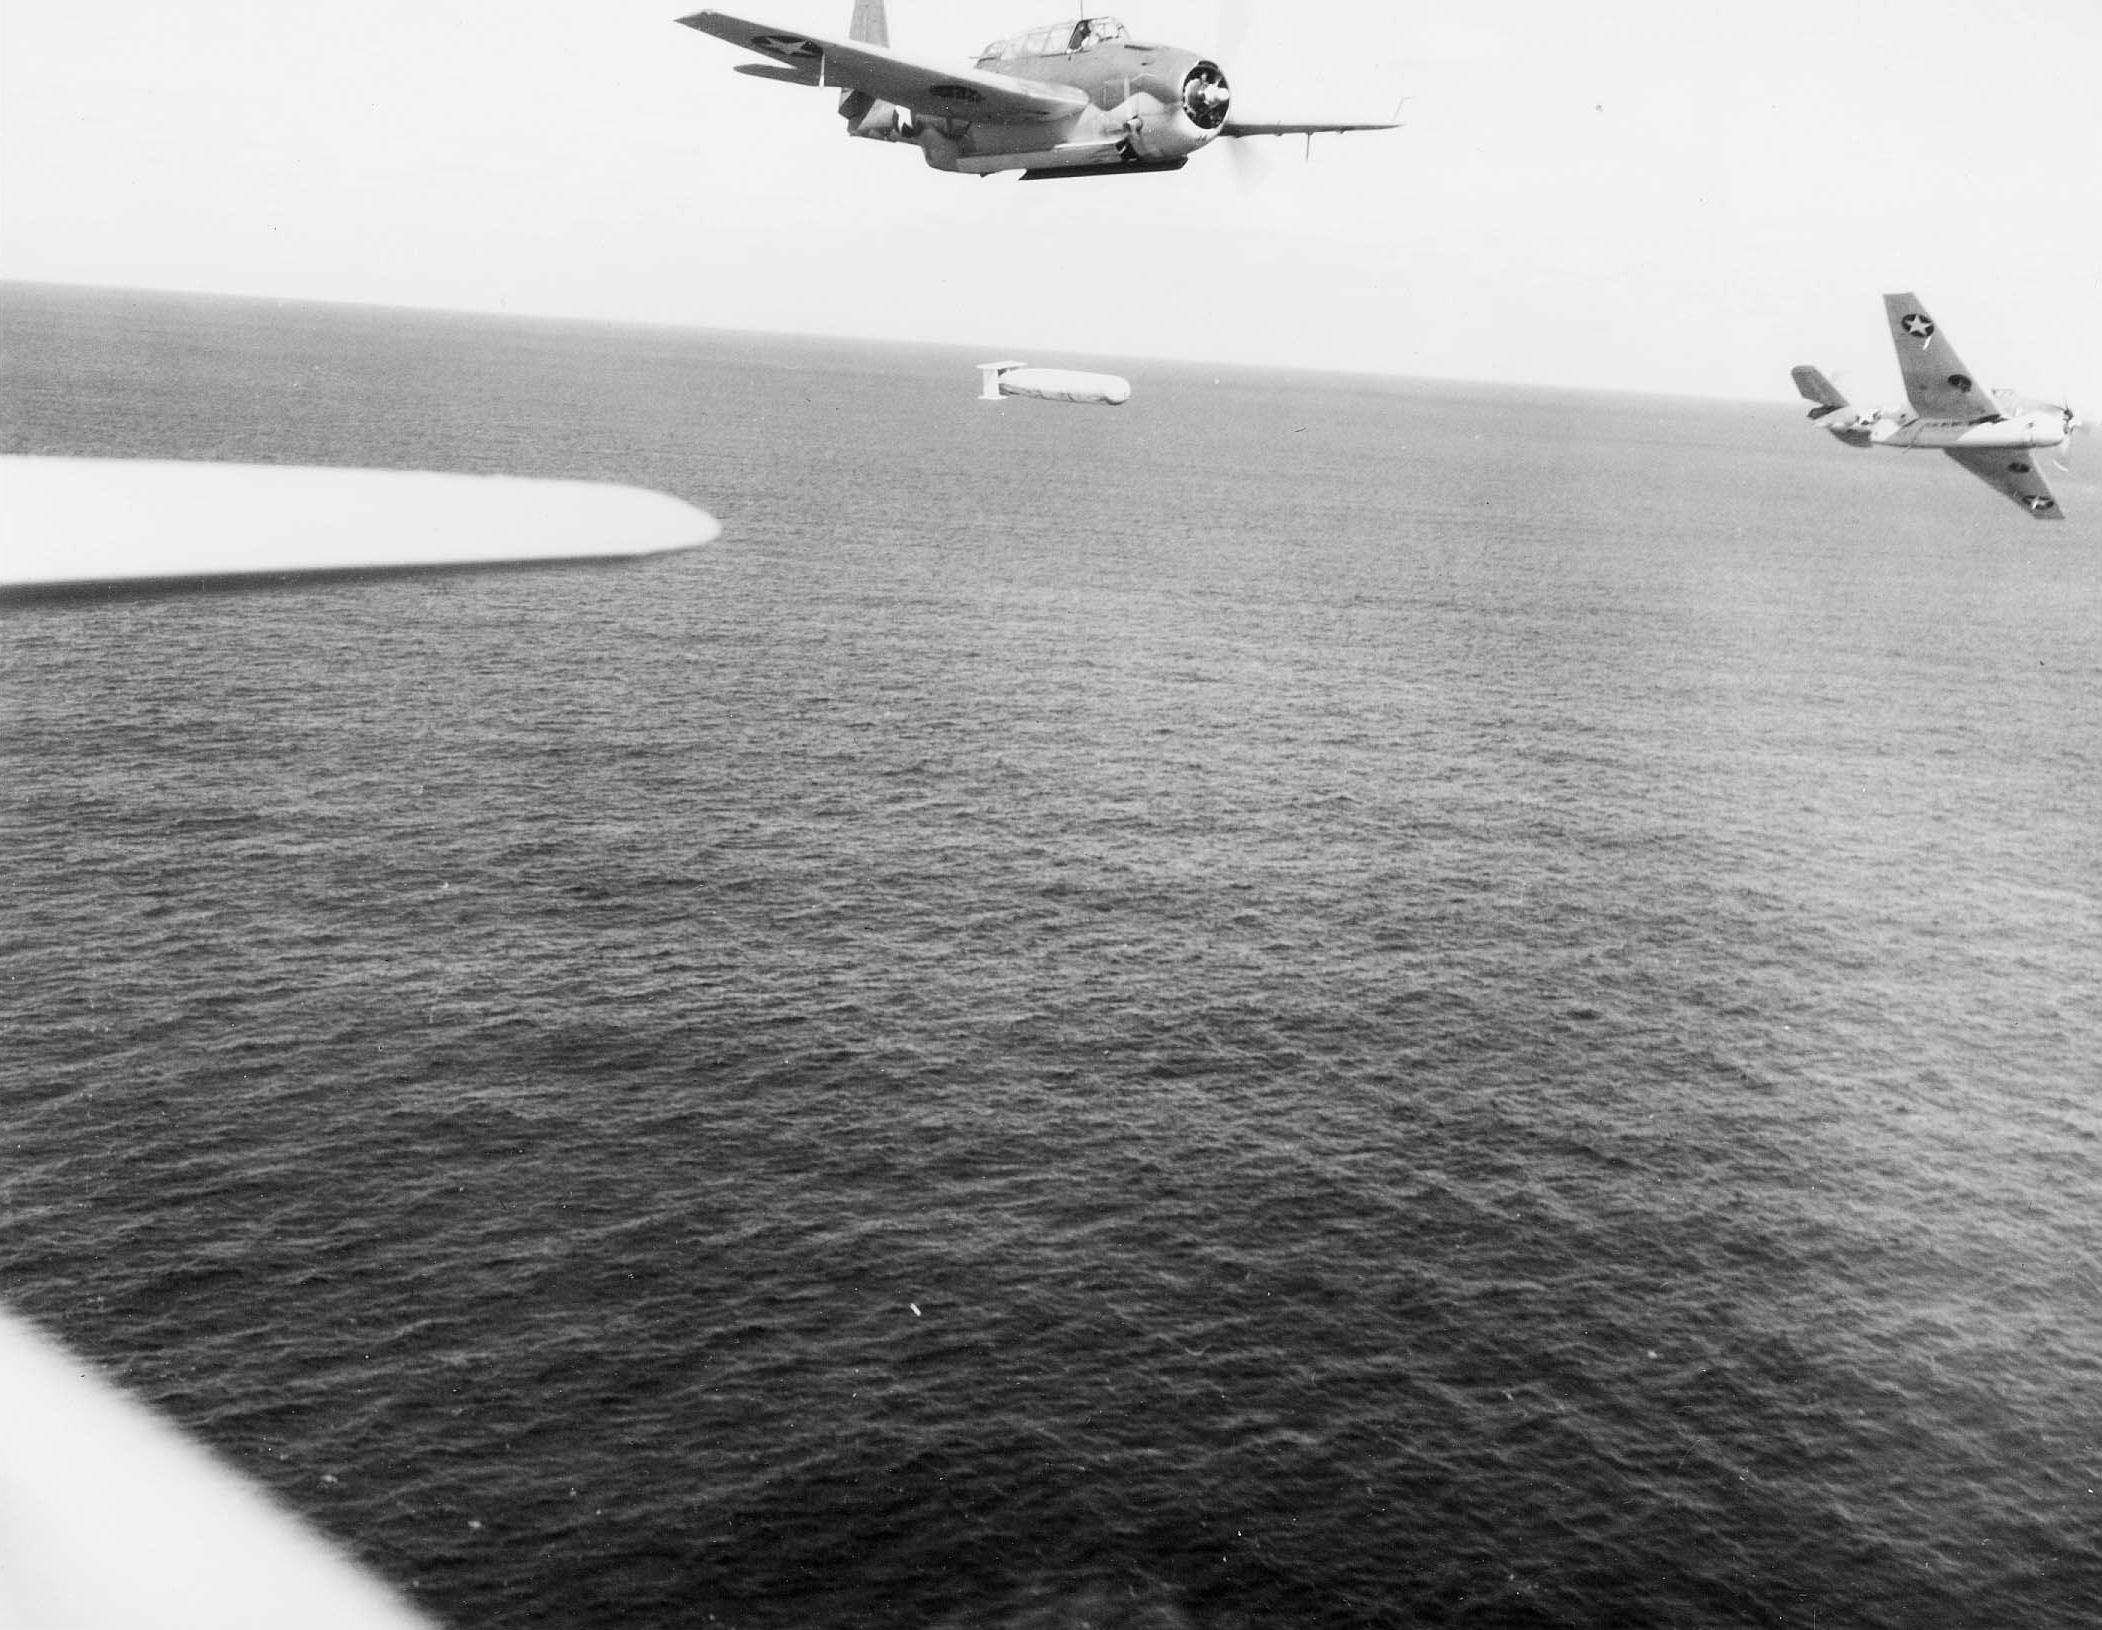 A training flight of TBF-1 Avengers lining up to drop practice torpedoes, late 1942, off the east coast of the United States. Photo 2 of 4.